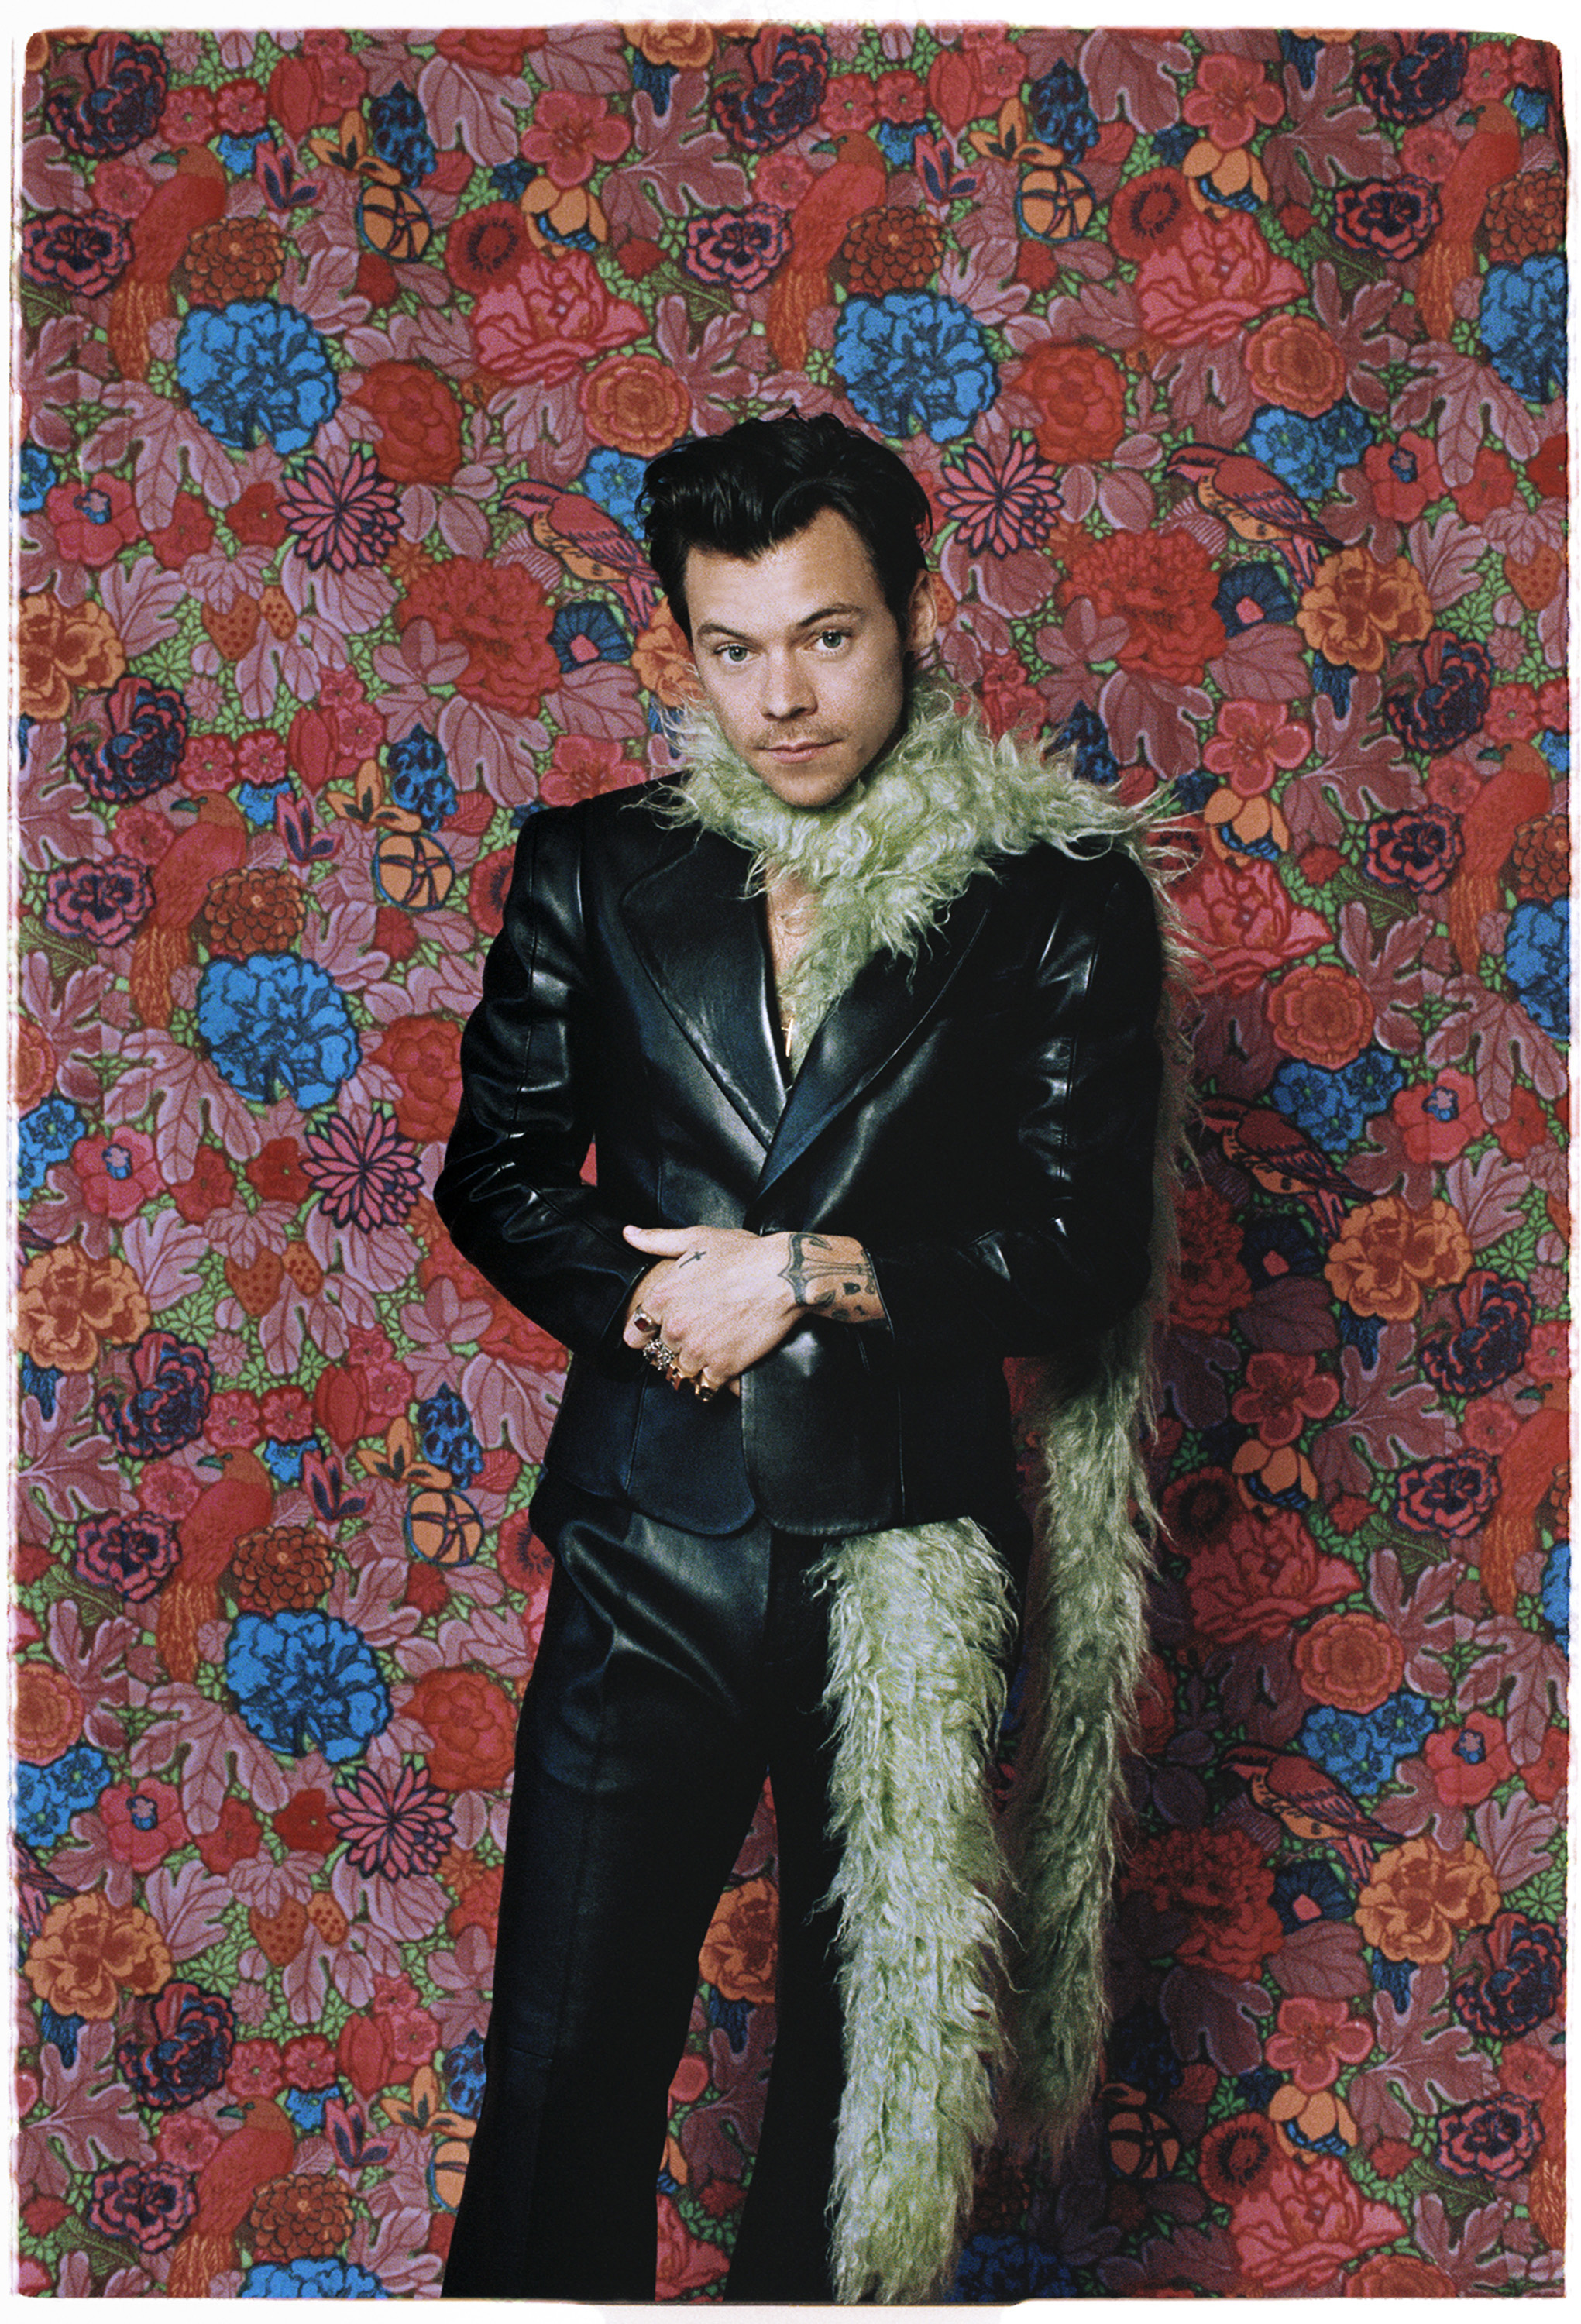 Harry Styles's Gucci Suit Now Has A Place In Music History, As